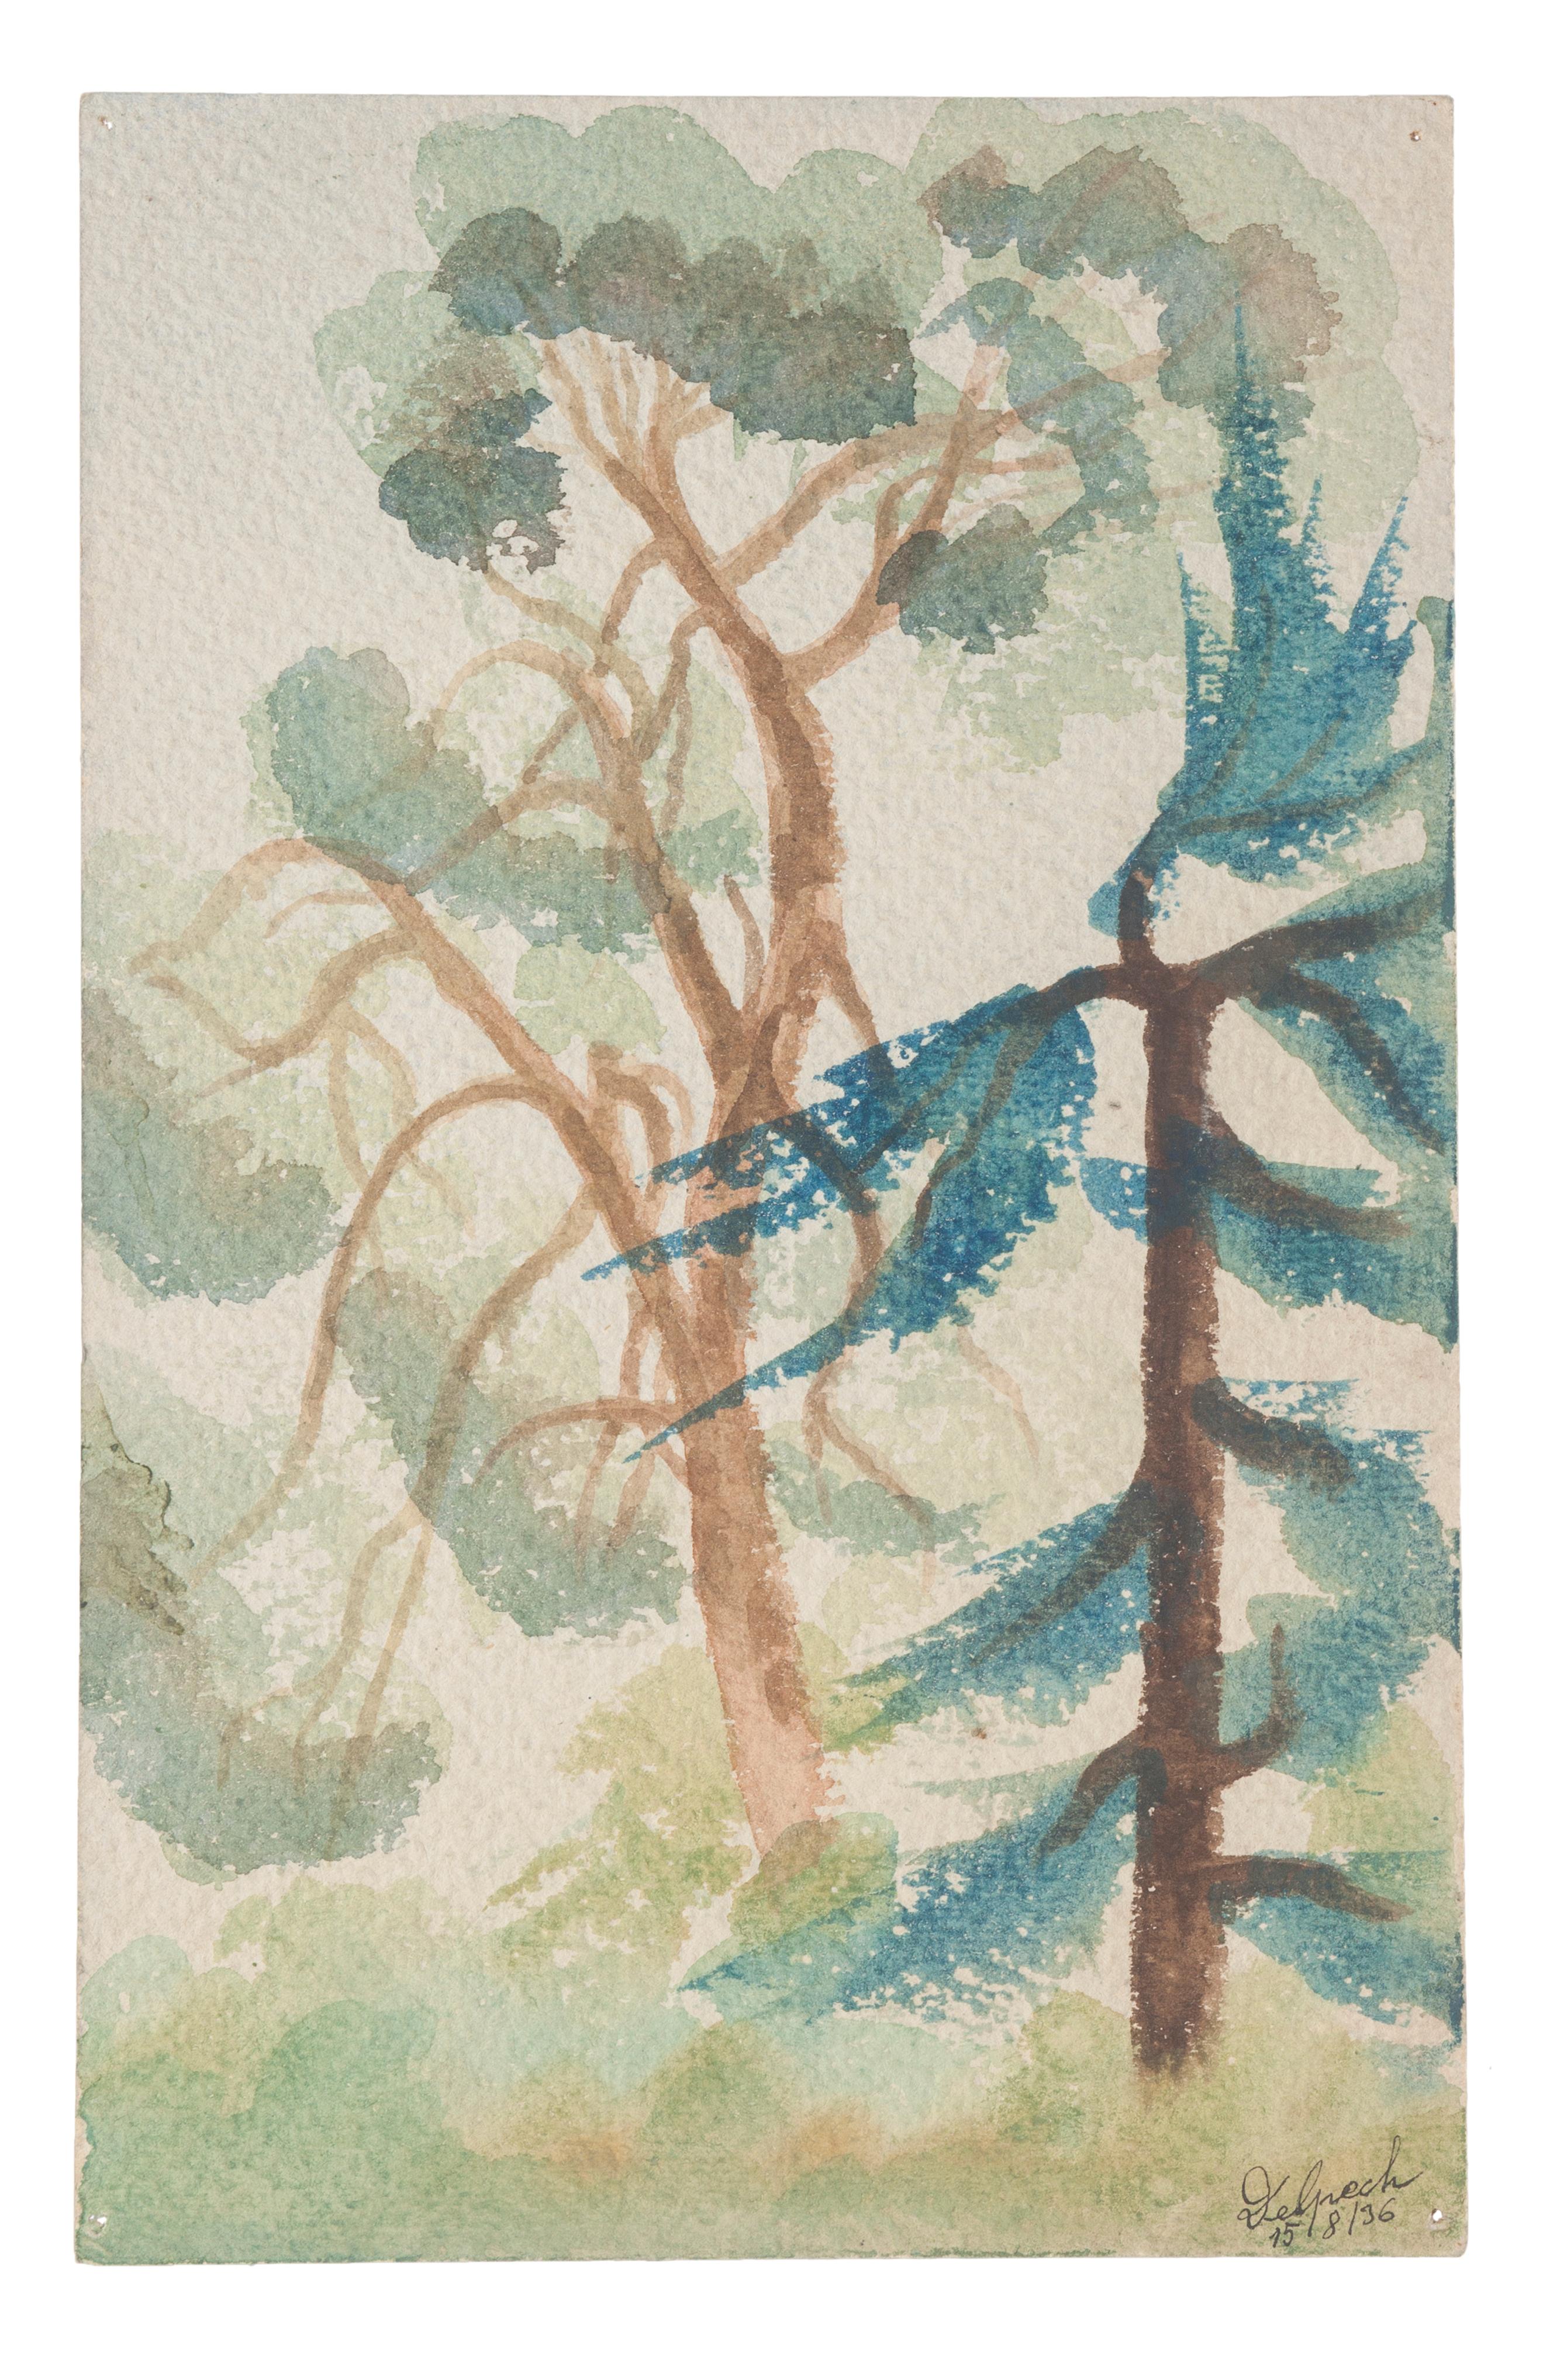 "Vegetation" is an original drawing in watercolor on paper, realized by Jean Delpech (1916-1988). 
The state of preservation of the artwork is very good.

Sheet dimension: 22.8 x 15 cm.

The artwork represents beautiful landscape with vivid color,